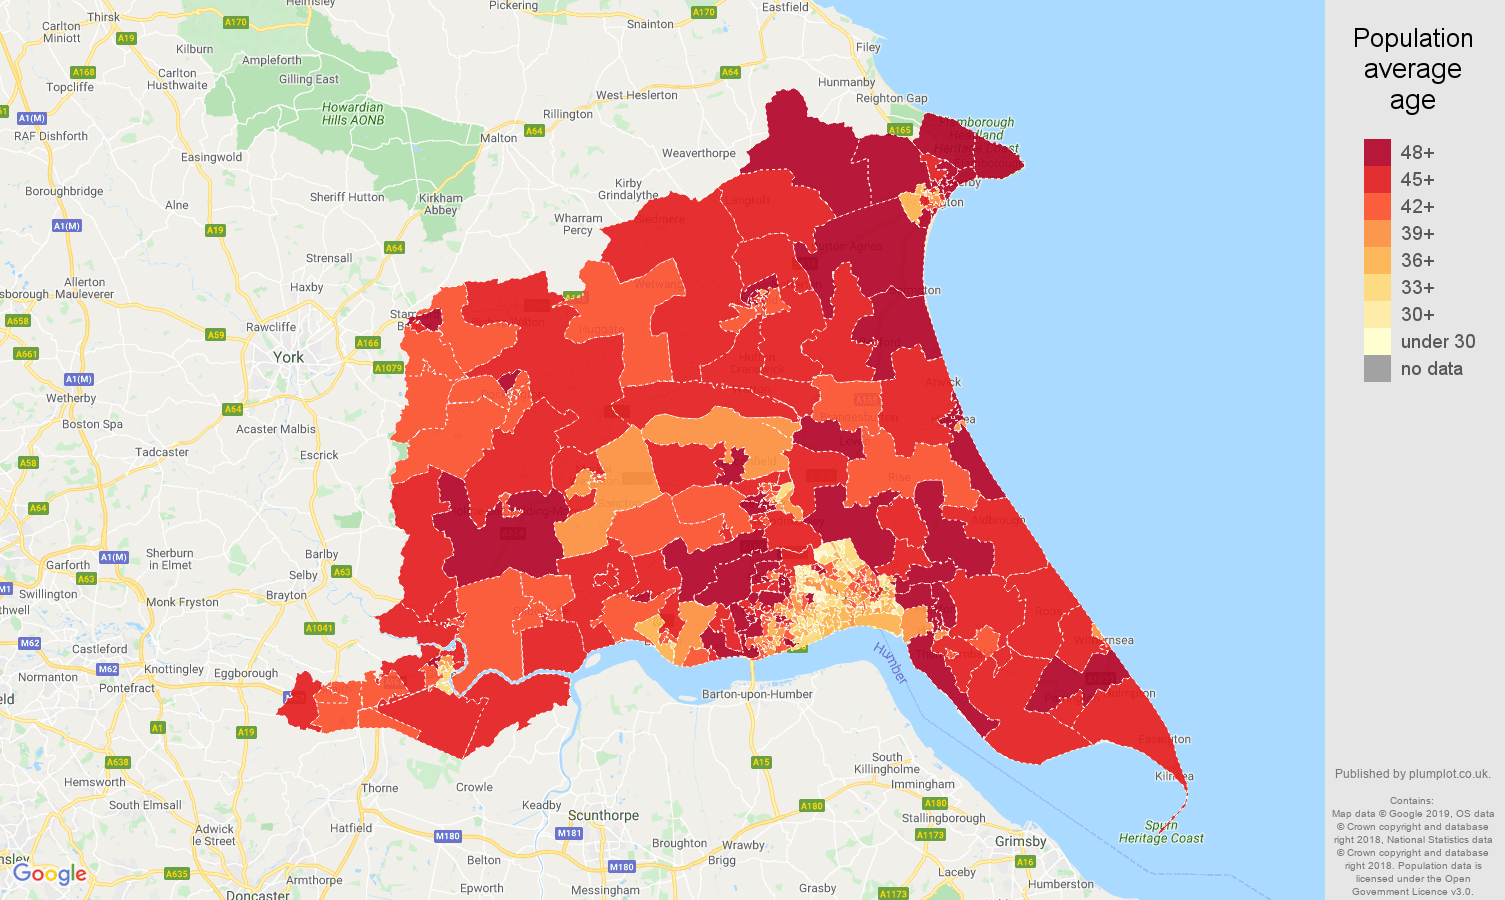 East Riding of Yorkshire population average age map